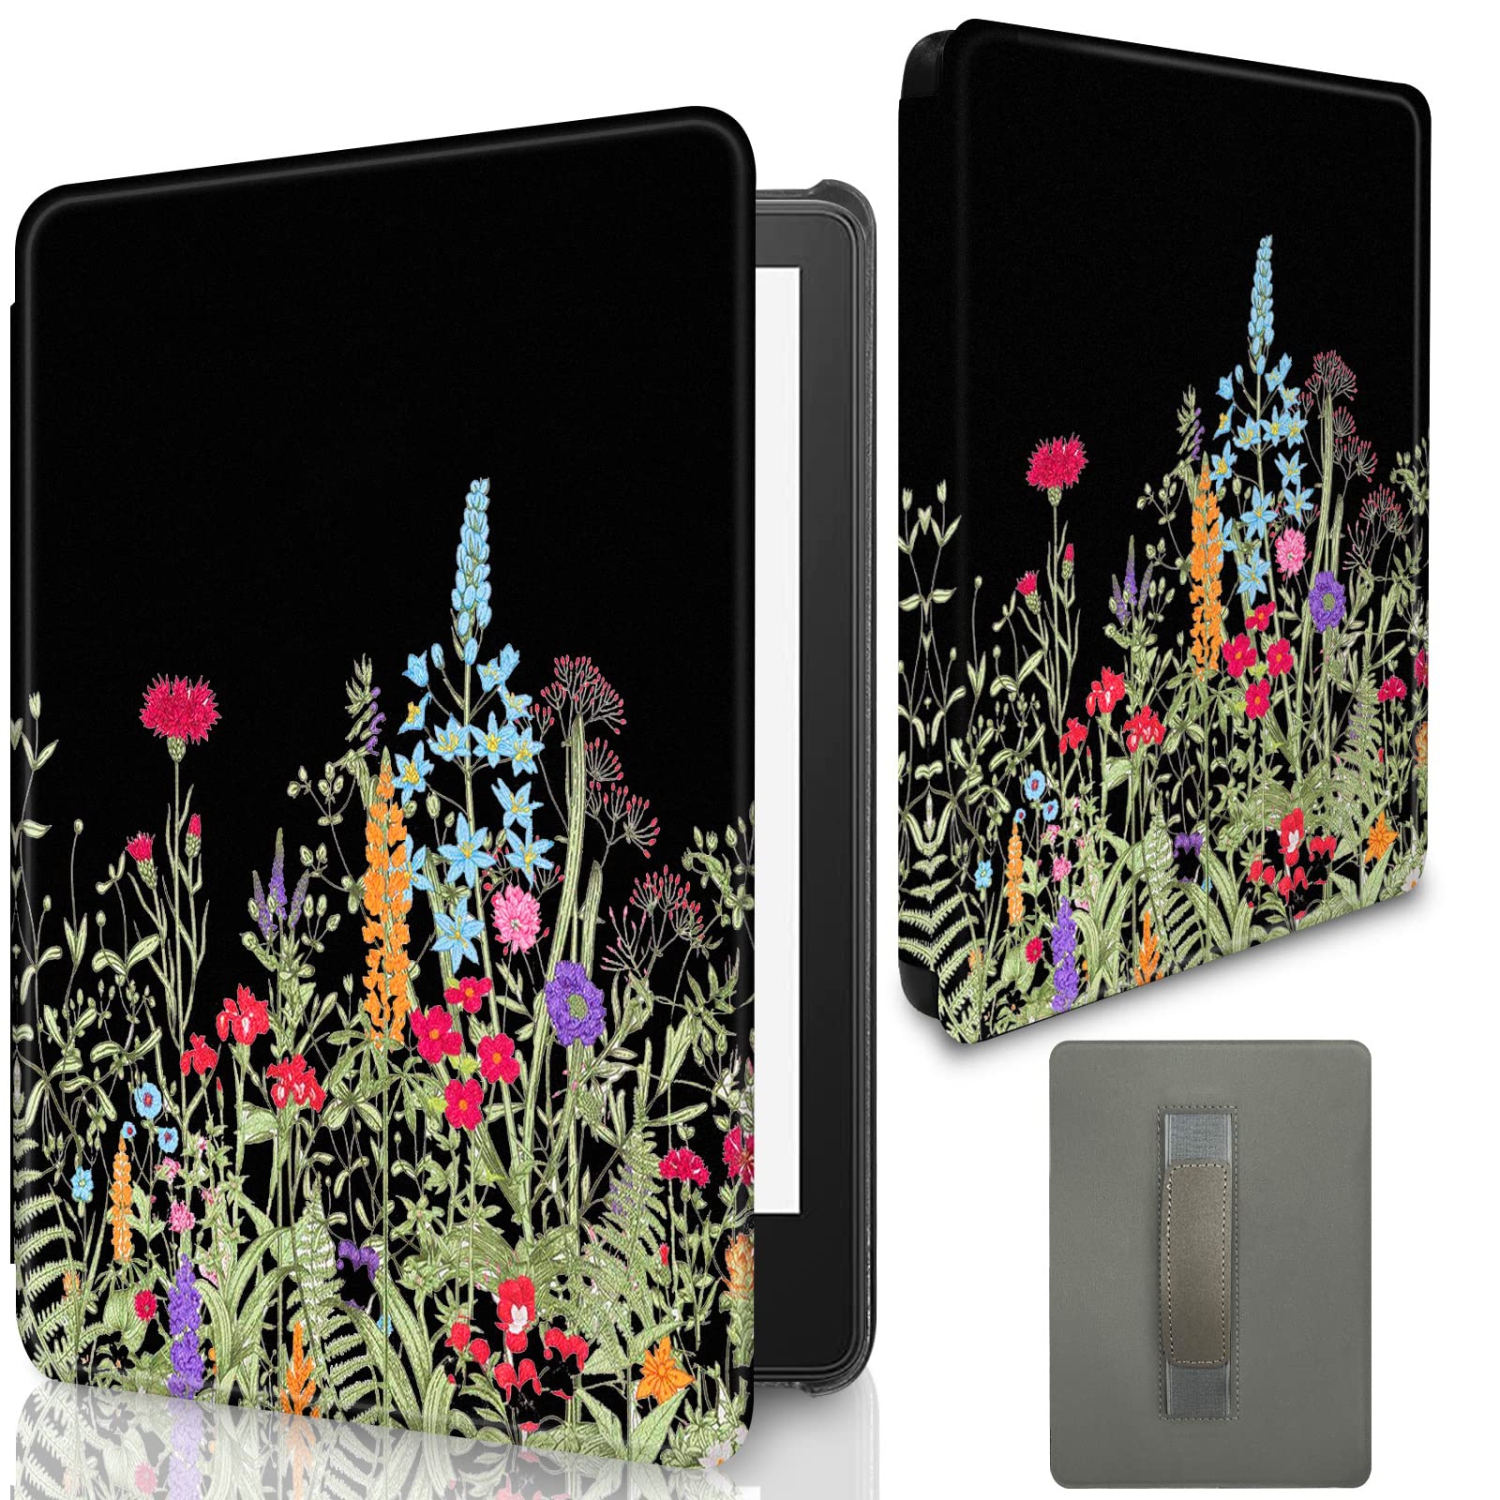 Case for 6.8” Kindle Paperwhite 11th Generation 2021- Premium Lightweight Book Cover with Auto Wake/Sleep for Amazon Kindle Paperwhite 2021 Signature (Black Colorful Plants)